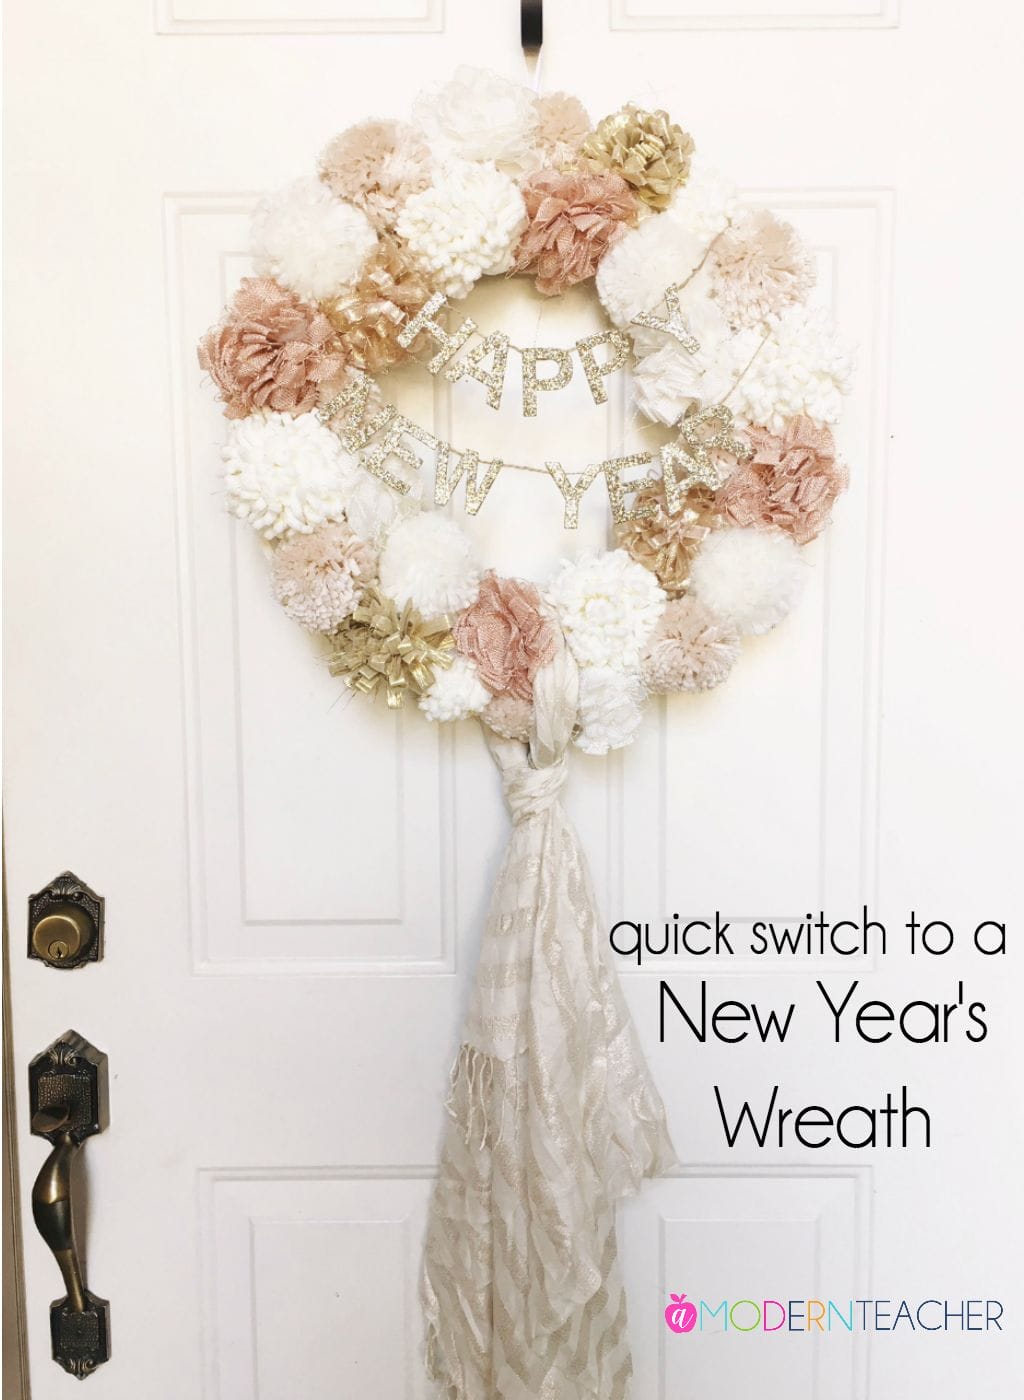 New Year's Eve Wreath idea | A quick idea on changing your Christmas wreath to a New Year's wreath